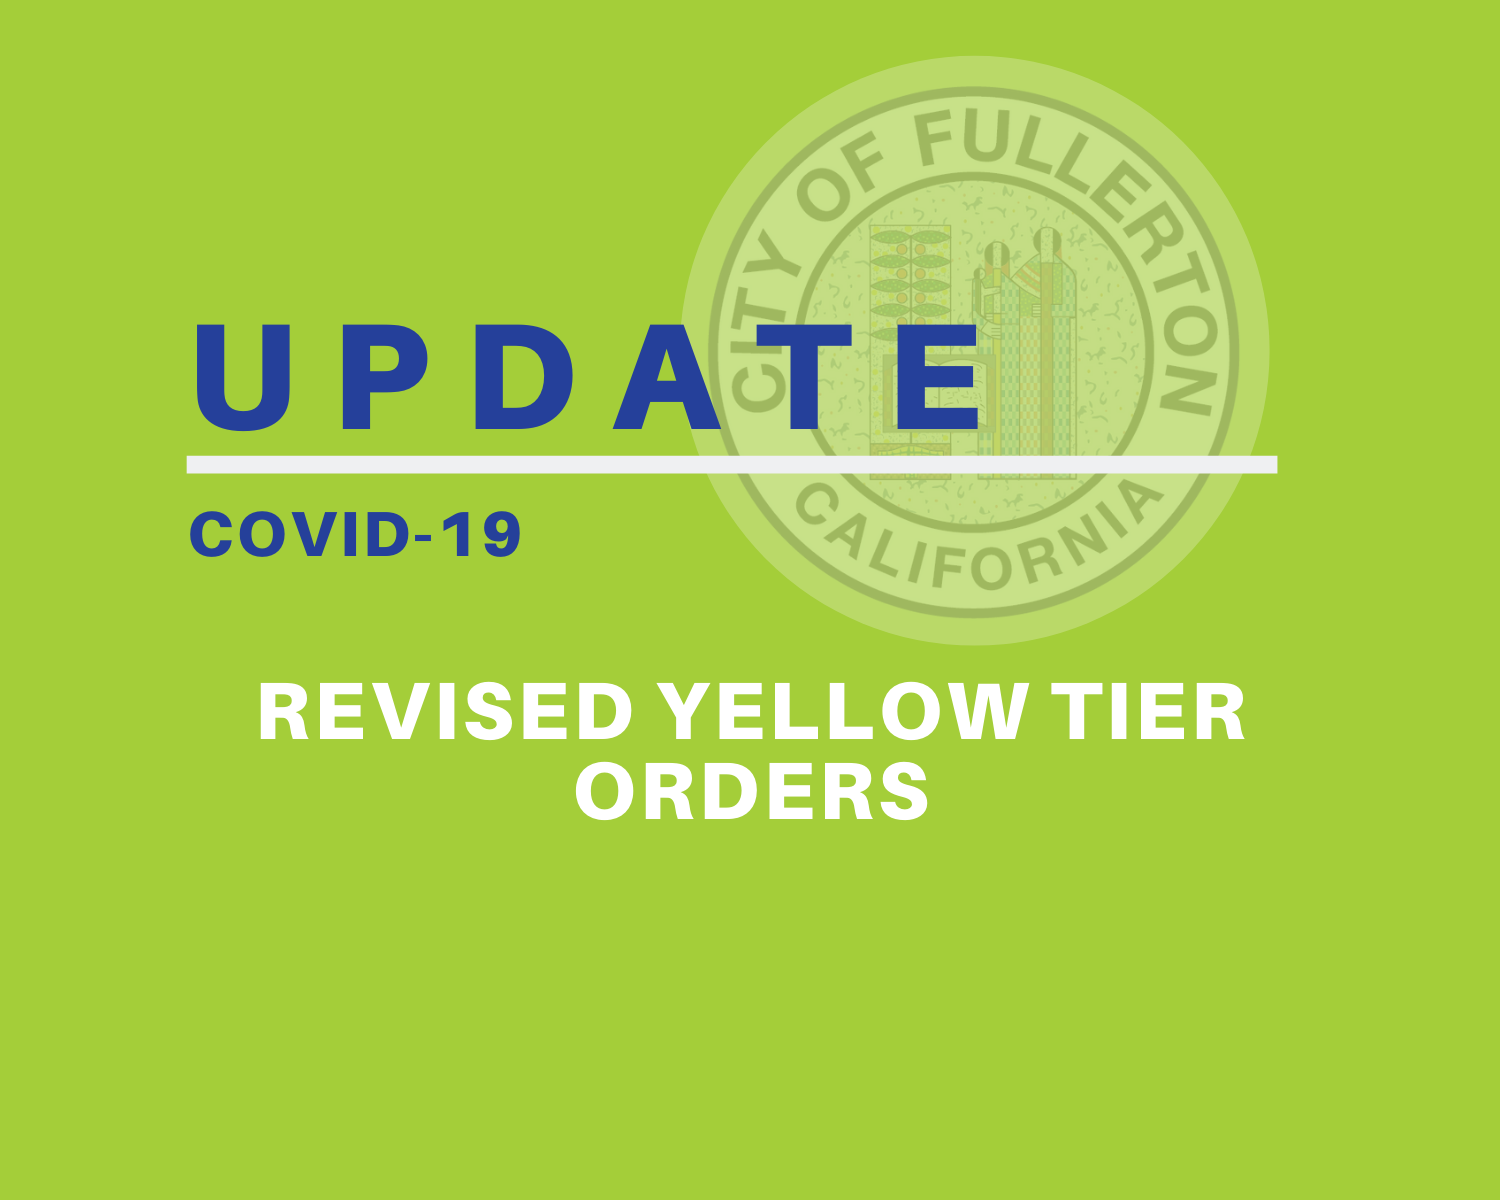 Revised Yellow Tier Orders